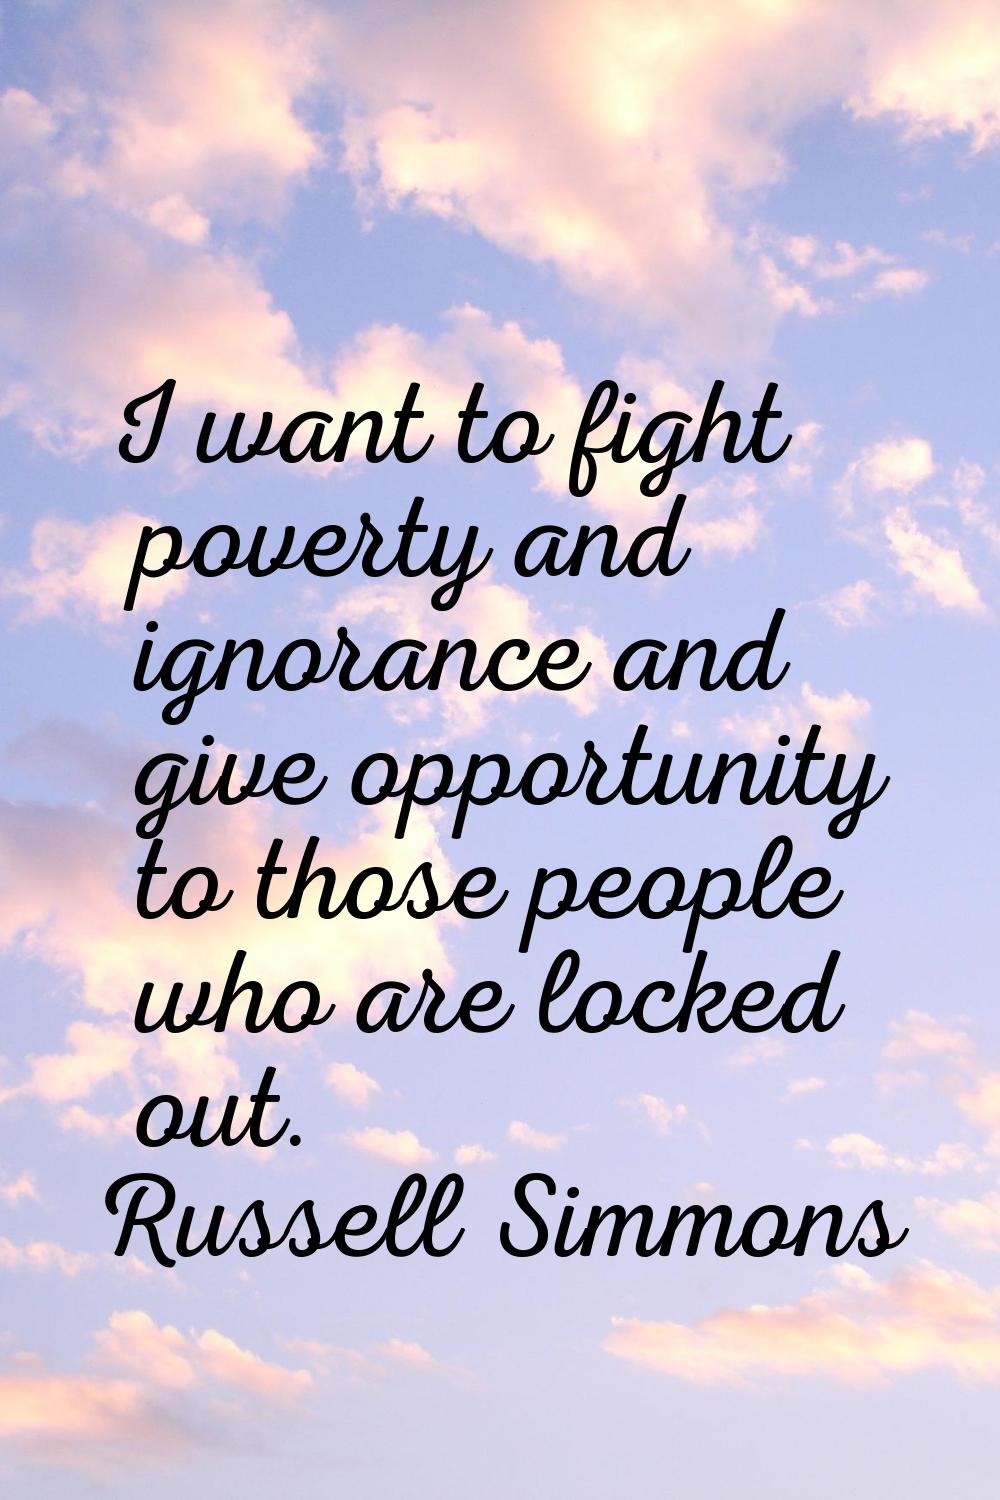 I want to fight poverty and ignorance and give opportunity to those people who are locked out.